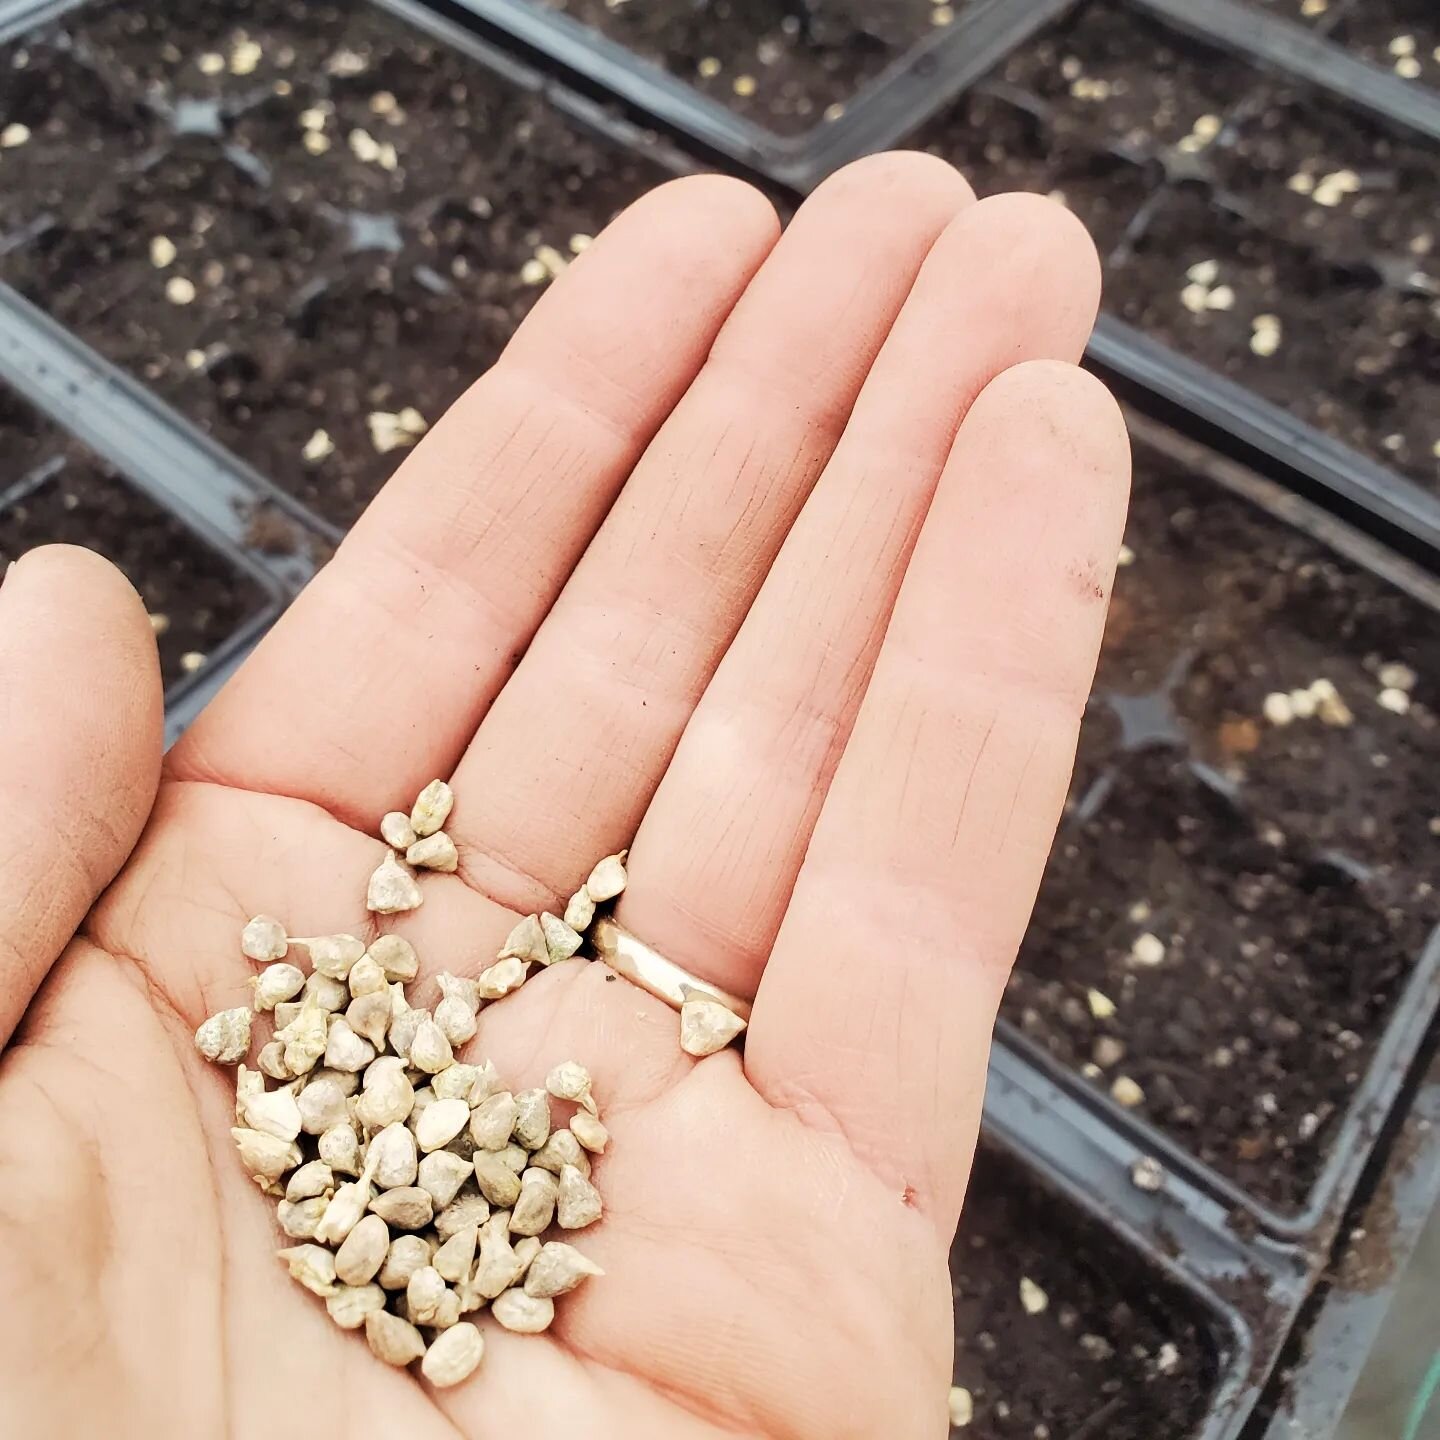 First sowing of the season! After weeks of tackling background plumbing, electrical, benches, driveway, and ice, we're finally up and running enough to get some seeds in the soil. What a great feeling to be with plants again! 🌱